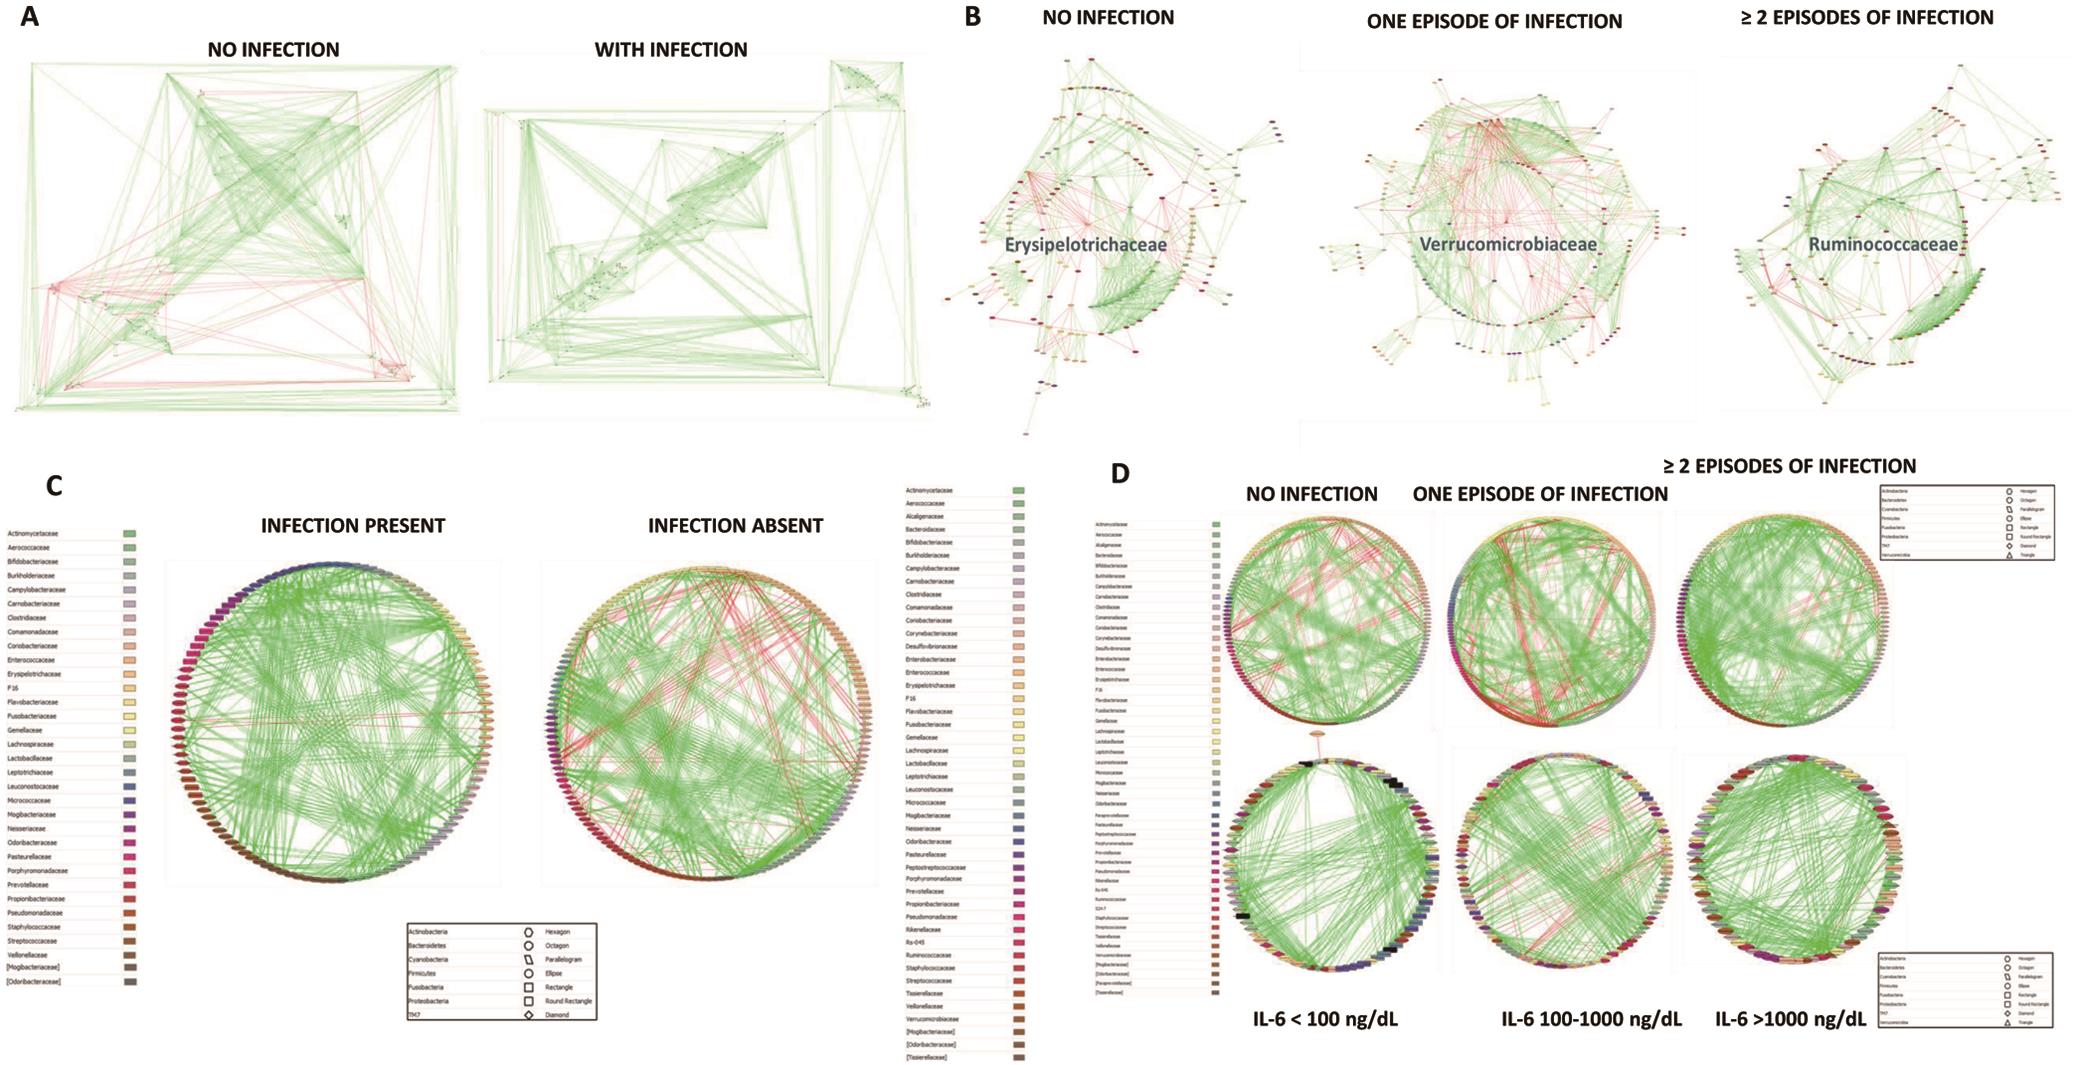 Network analysis showing topology and interactions between bacterial taxa in patients with cirrhosis grouped by clinical or investigational variables.